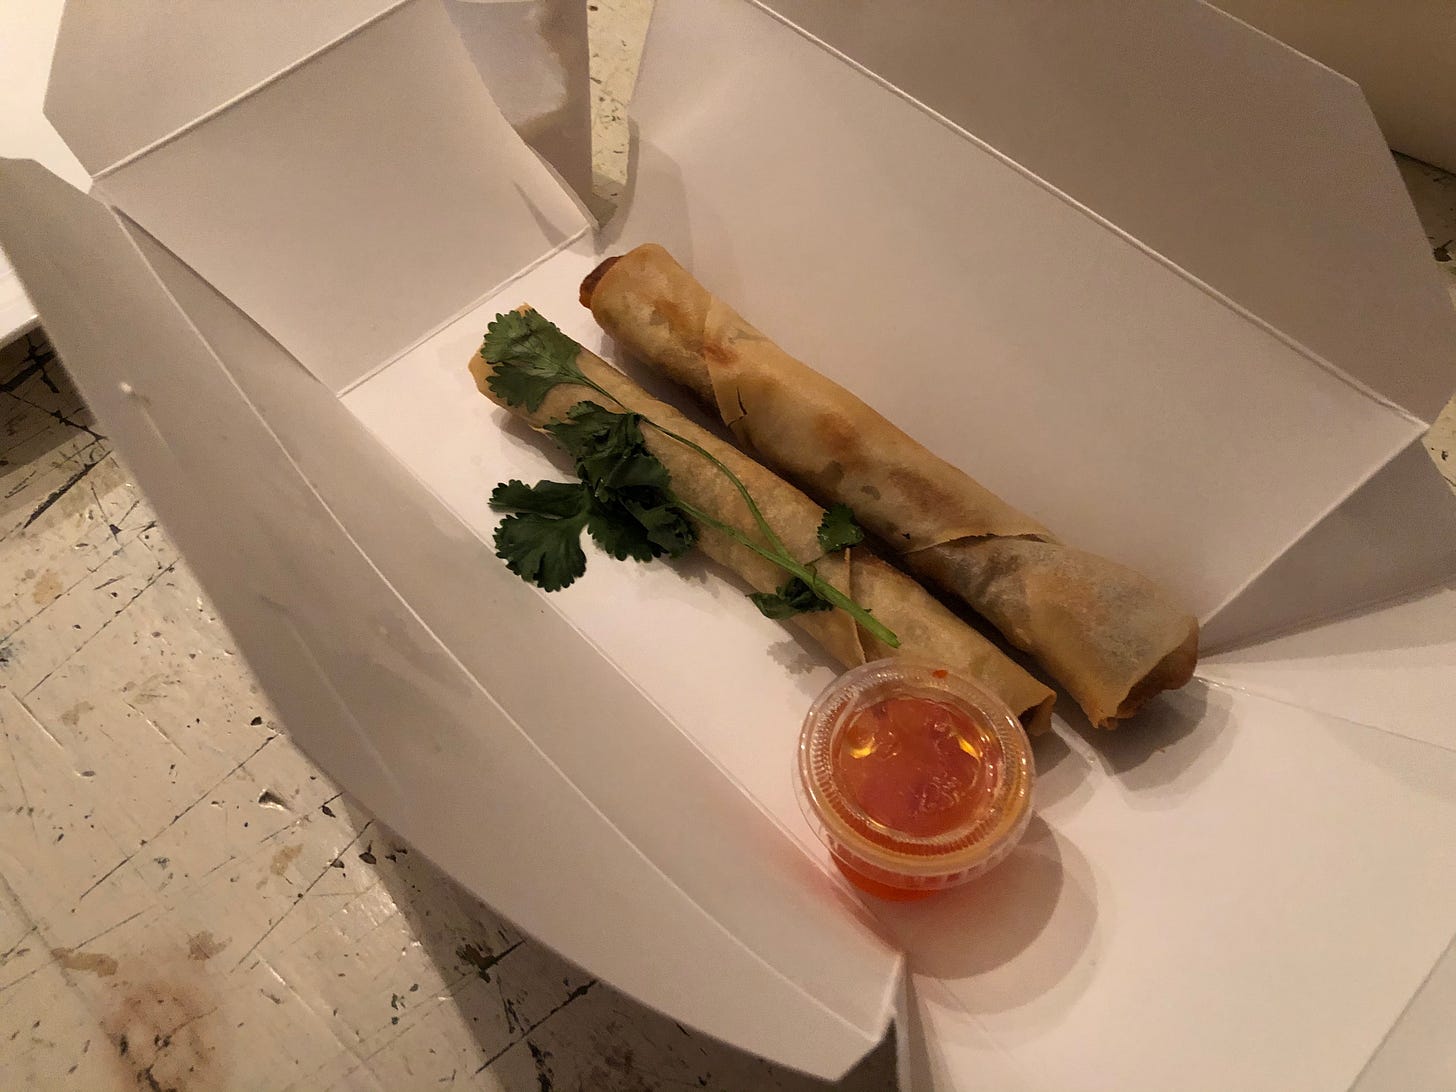 Two curry spring rolls in a take-out container